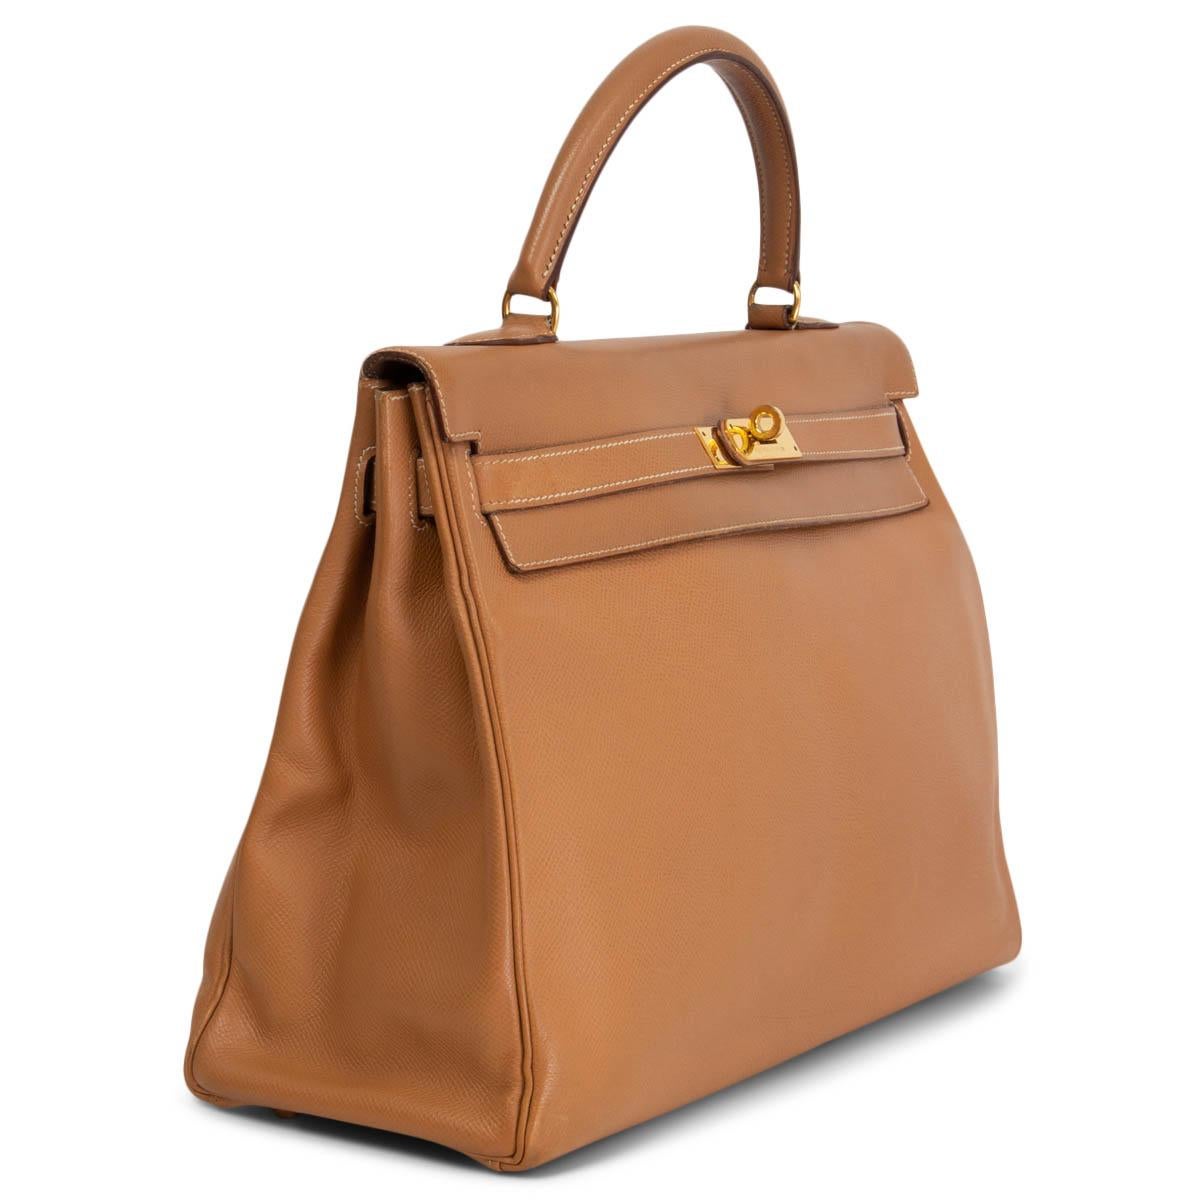 100% authentic Hermès Kelly I 35 Retourne bag in naturelle (light tan) Veau Courchevel leather with contrasting off-white stitching. Lined in Chevre (goat skin) with two open pockets against the front and a zipper pocket against the back. Has been